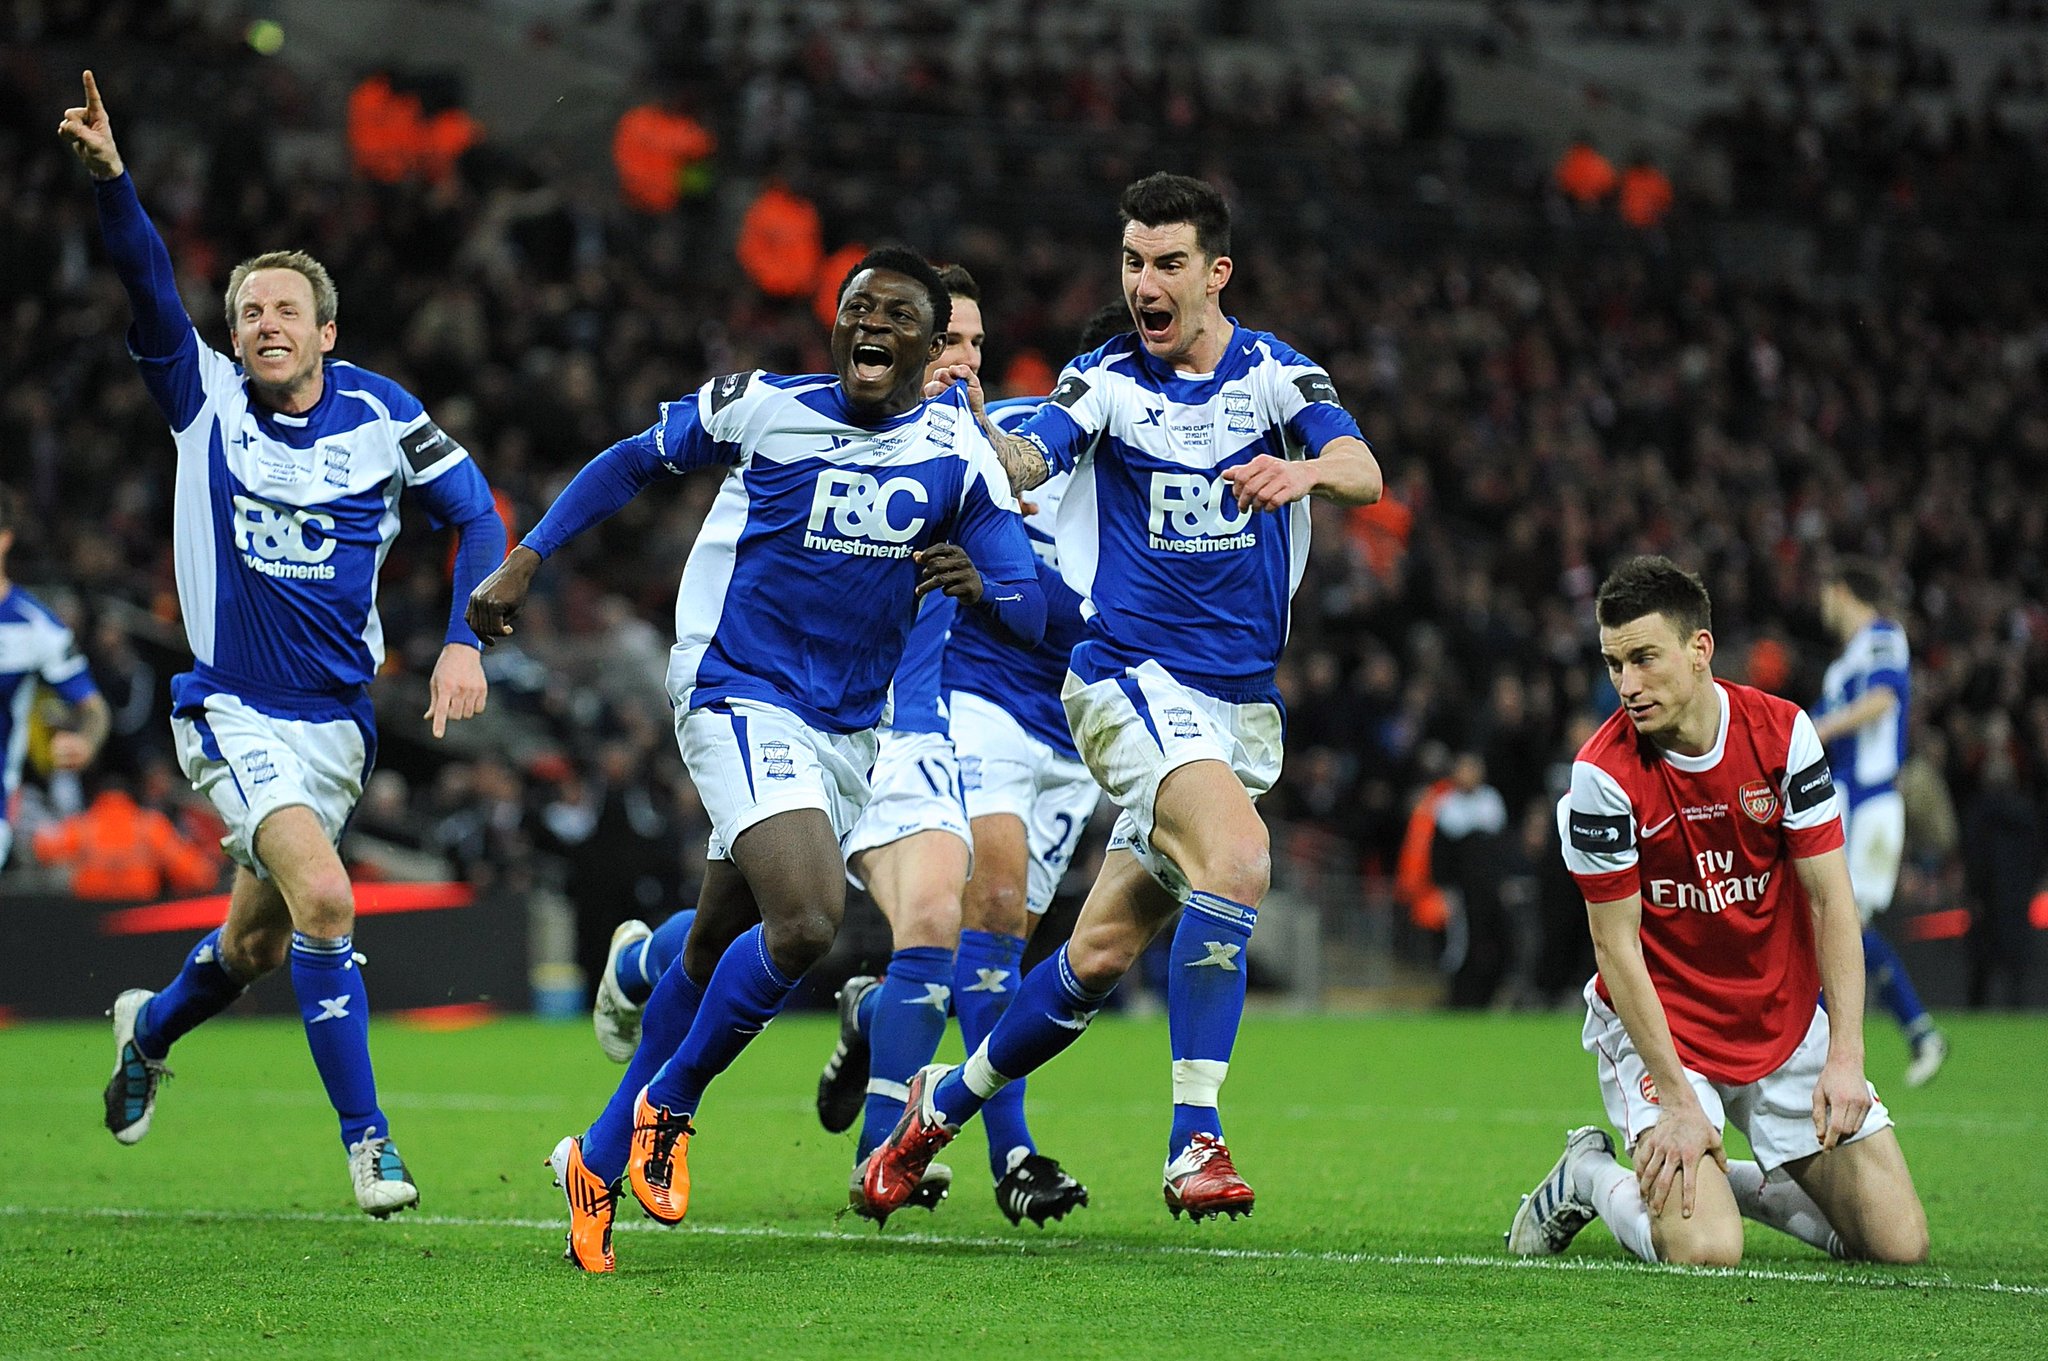 Happy 33rd Birthday to the one and only...

OBAFEMI MARTINS! 